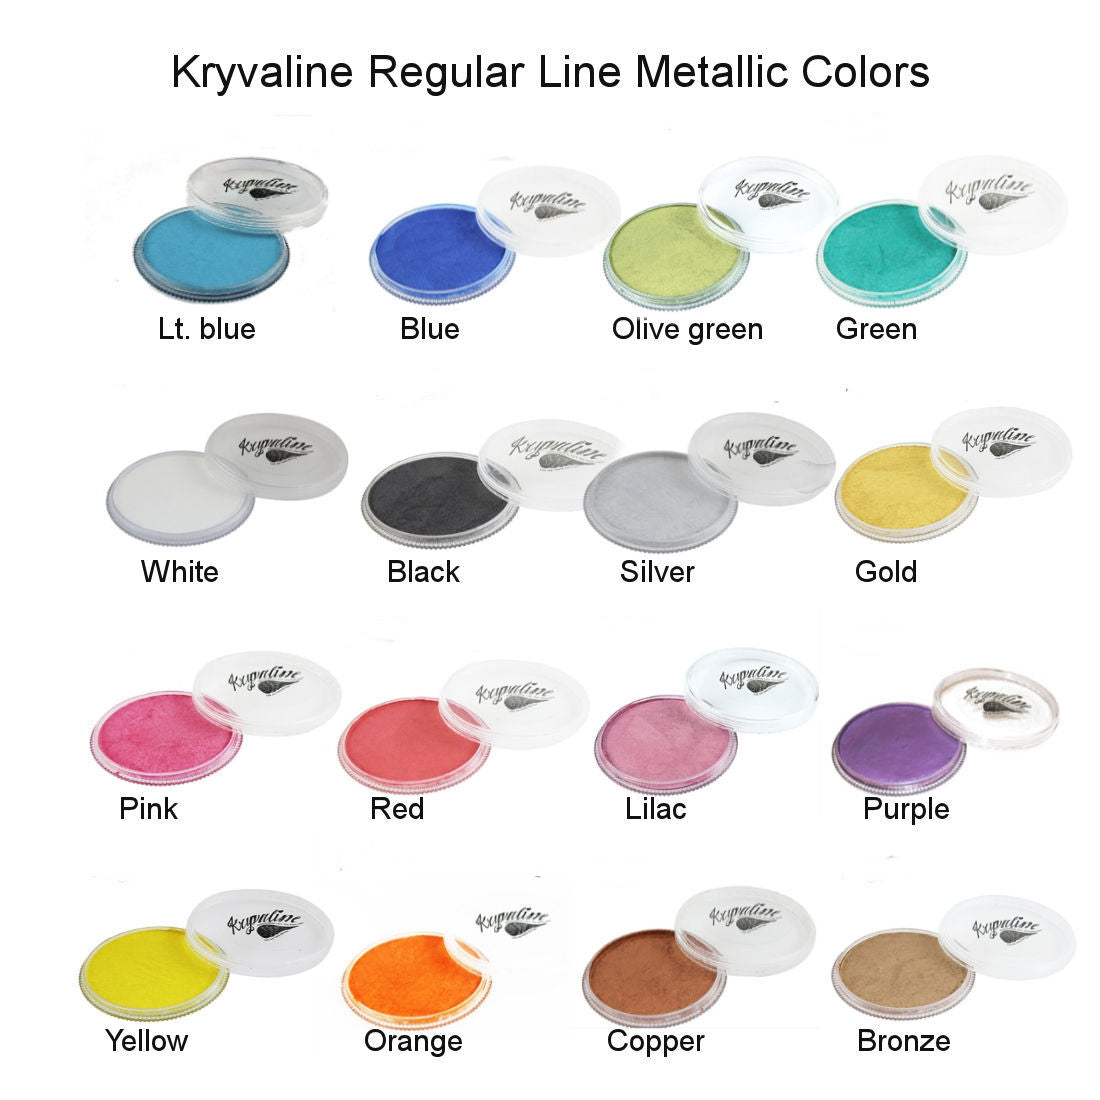 Kryvaline Face and body Paint Metallic Colors 30g Yellow - Kryvaline Body Art Makeup | Glitter Tattoos, Face & Body Paint, Design - Kryvaline Body Art Makeup